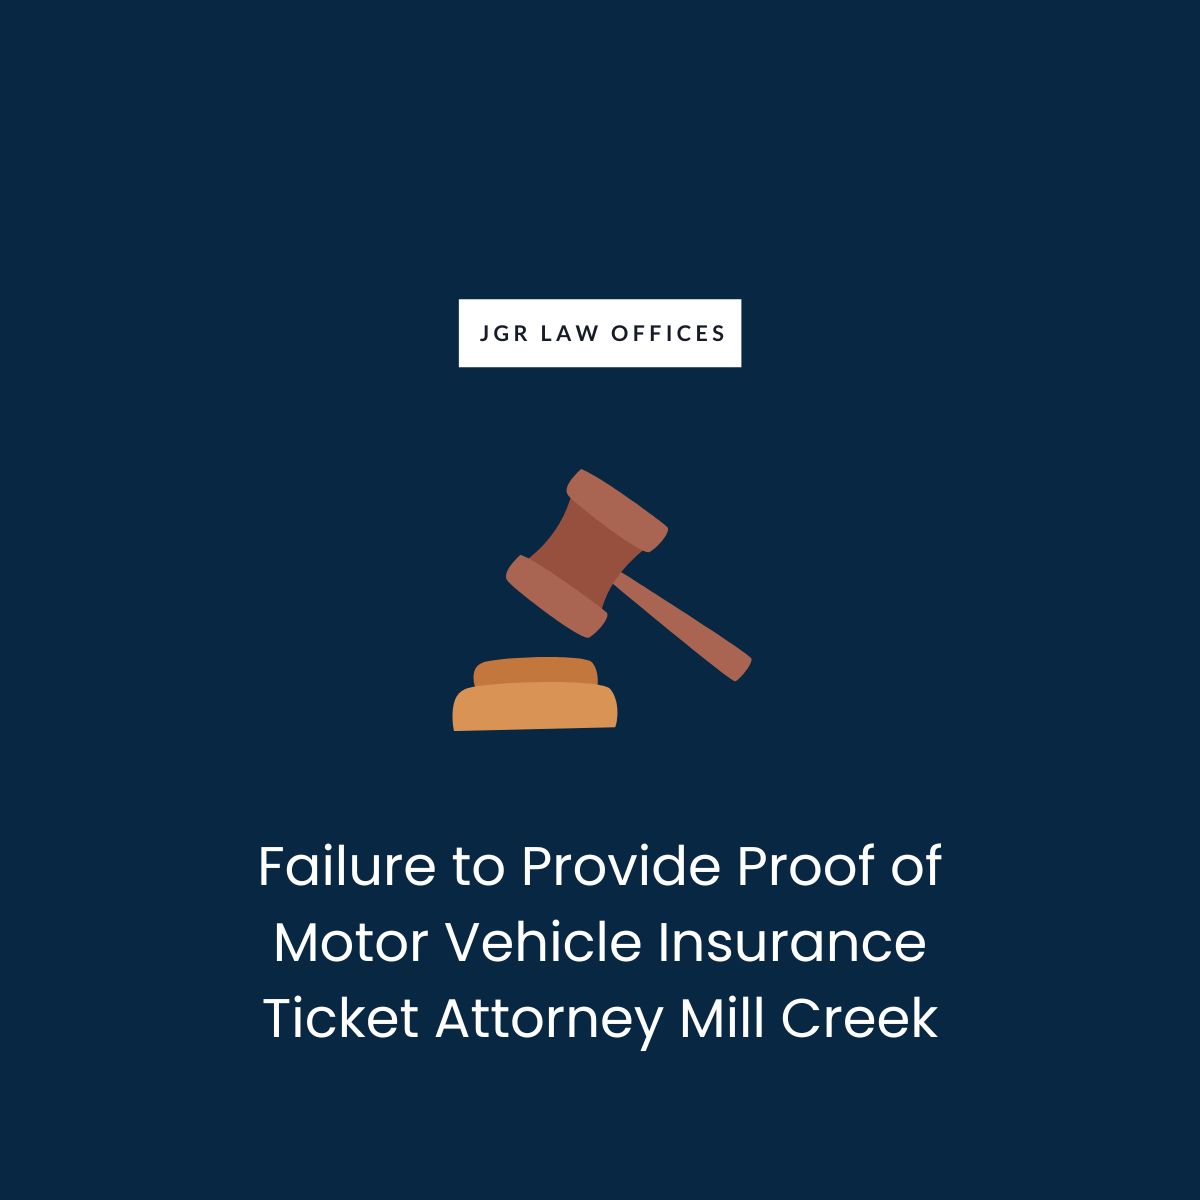 Failure to Provide Proof of Motor Vehicle Insurance Ticket Attorney Mill Creek